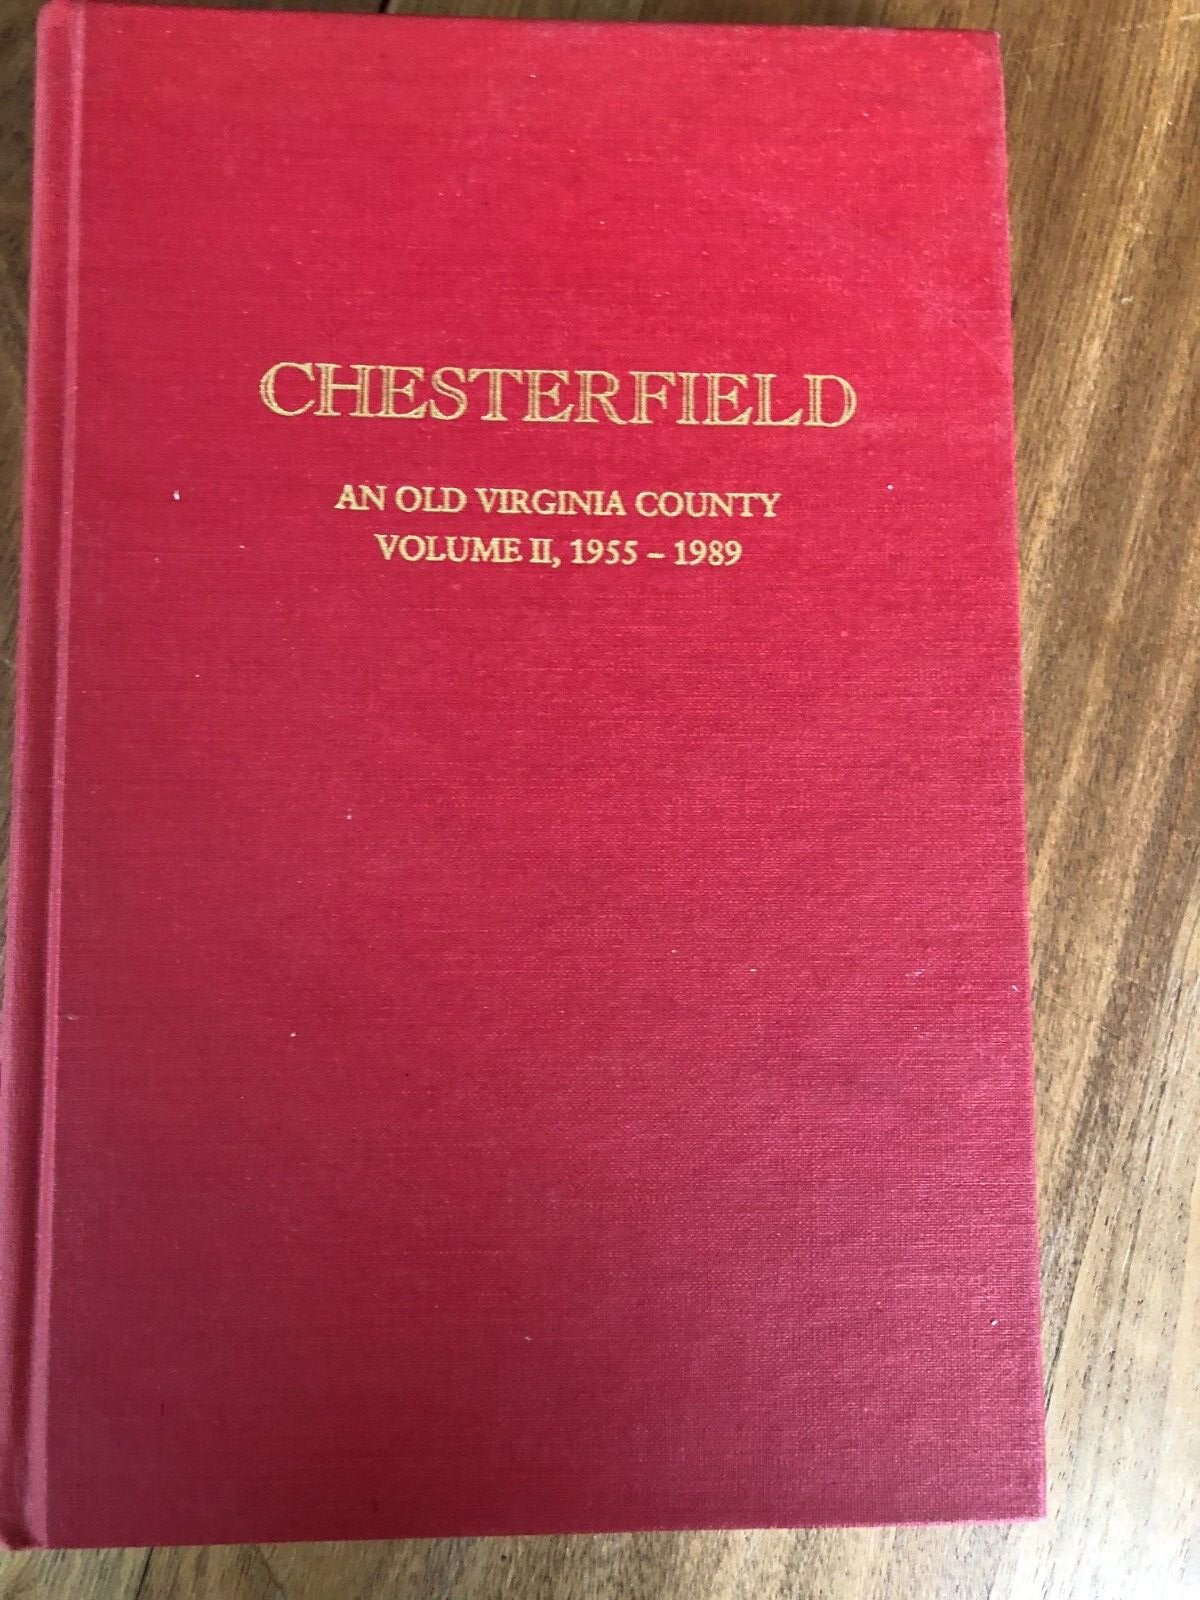 Chesterfield An Old Virginia County, VoI I 1955-89 & Heritage of a Half Century